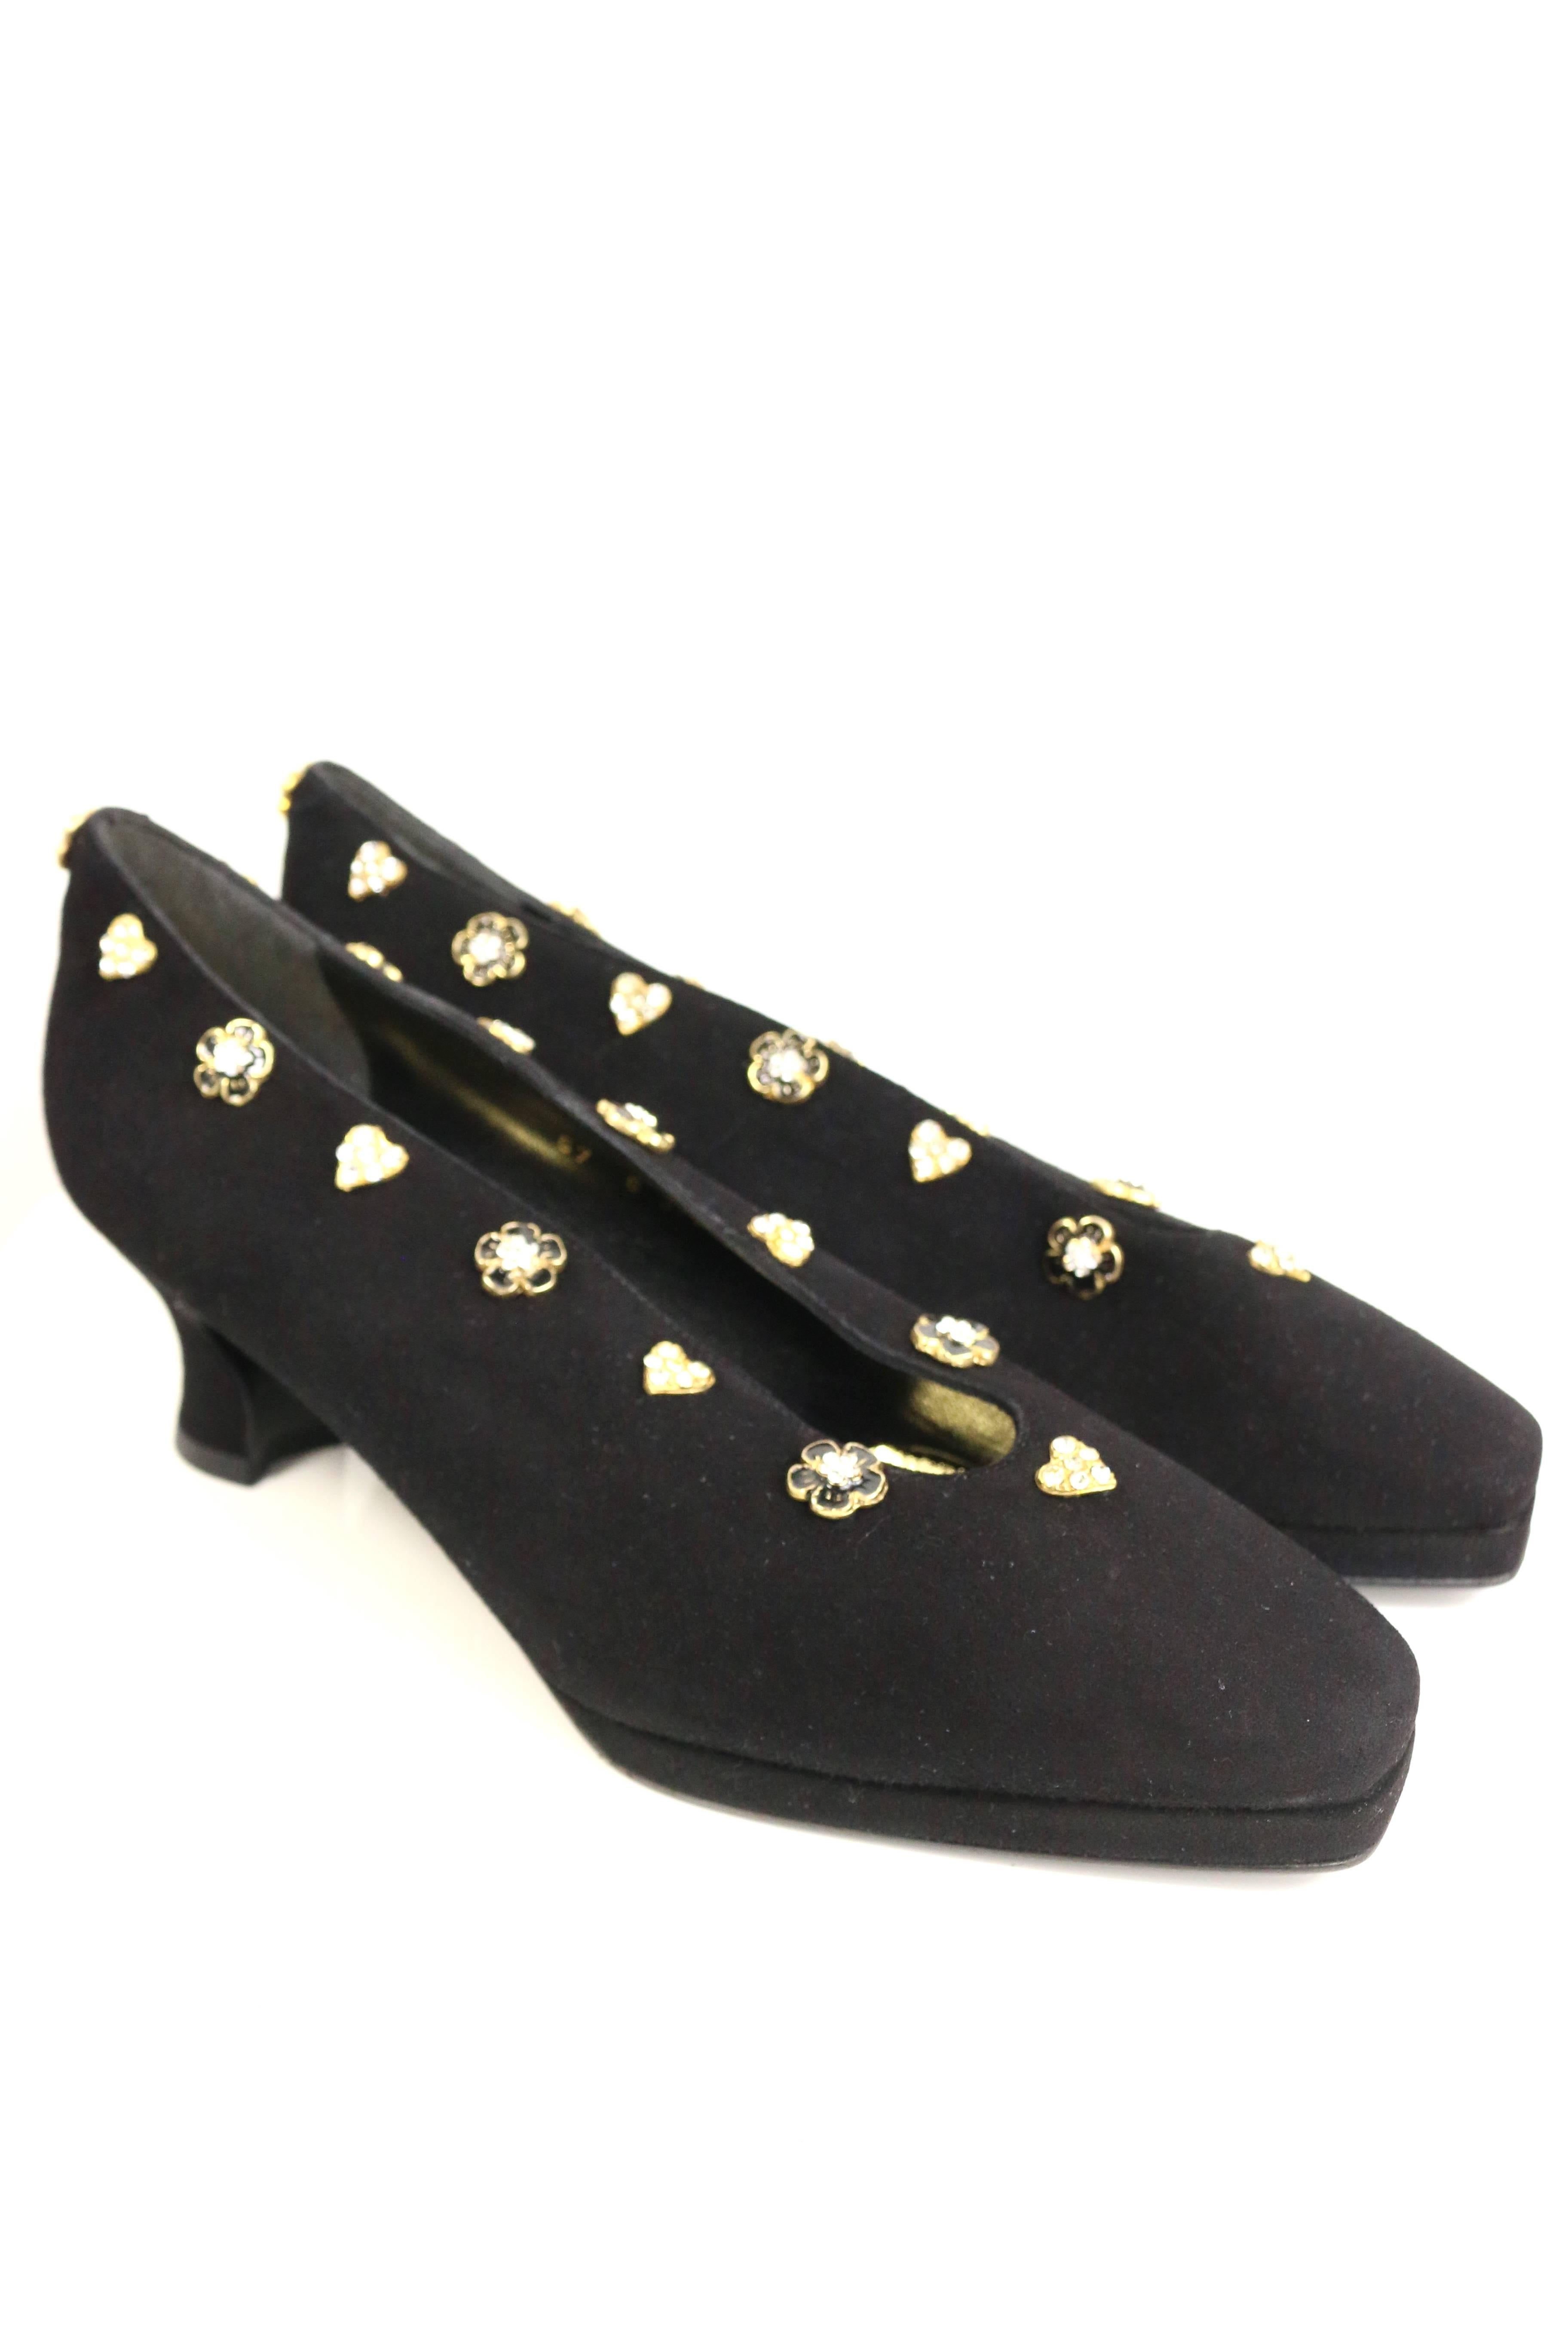 - Vintage 80s Beverly Feldman black suede flower and heart rhinestones charms shoes. We truly believe that a well-made shoes can make women really happy!!!

- Made in Spain. 

- Size 37.5. 

- One of the five rhinestone is lost from one heart charm.